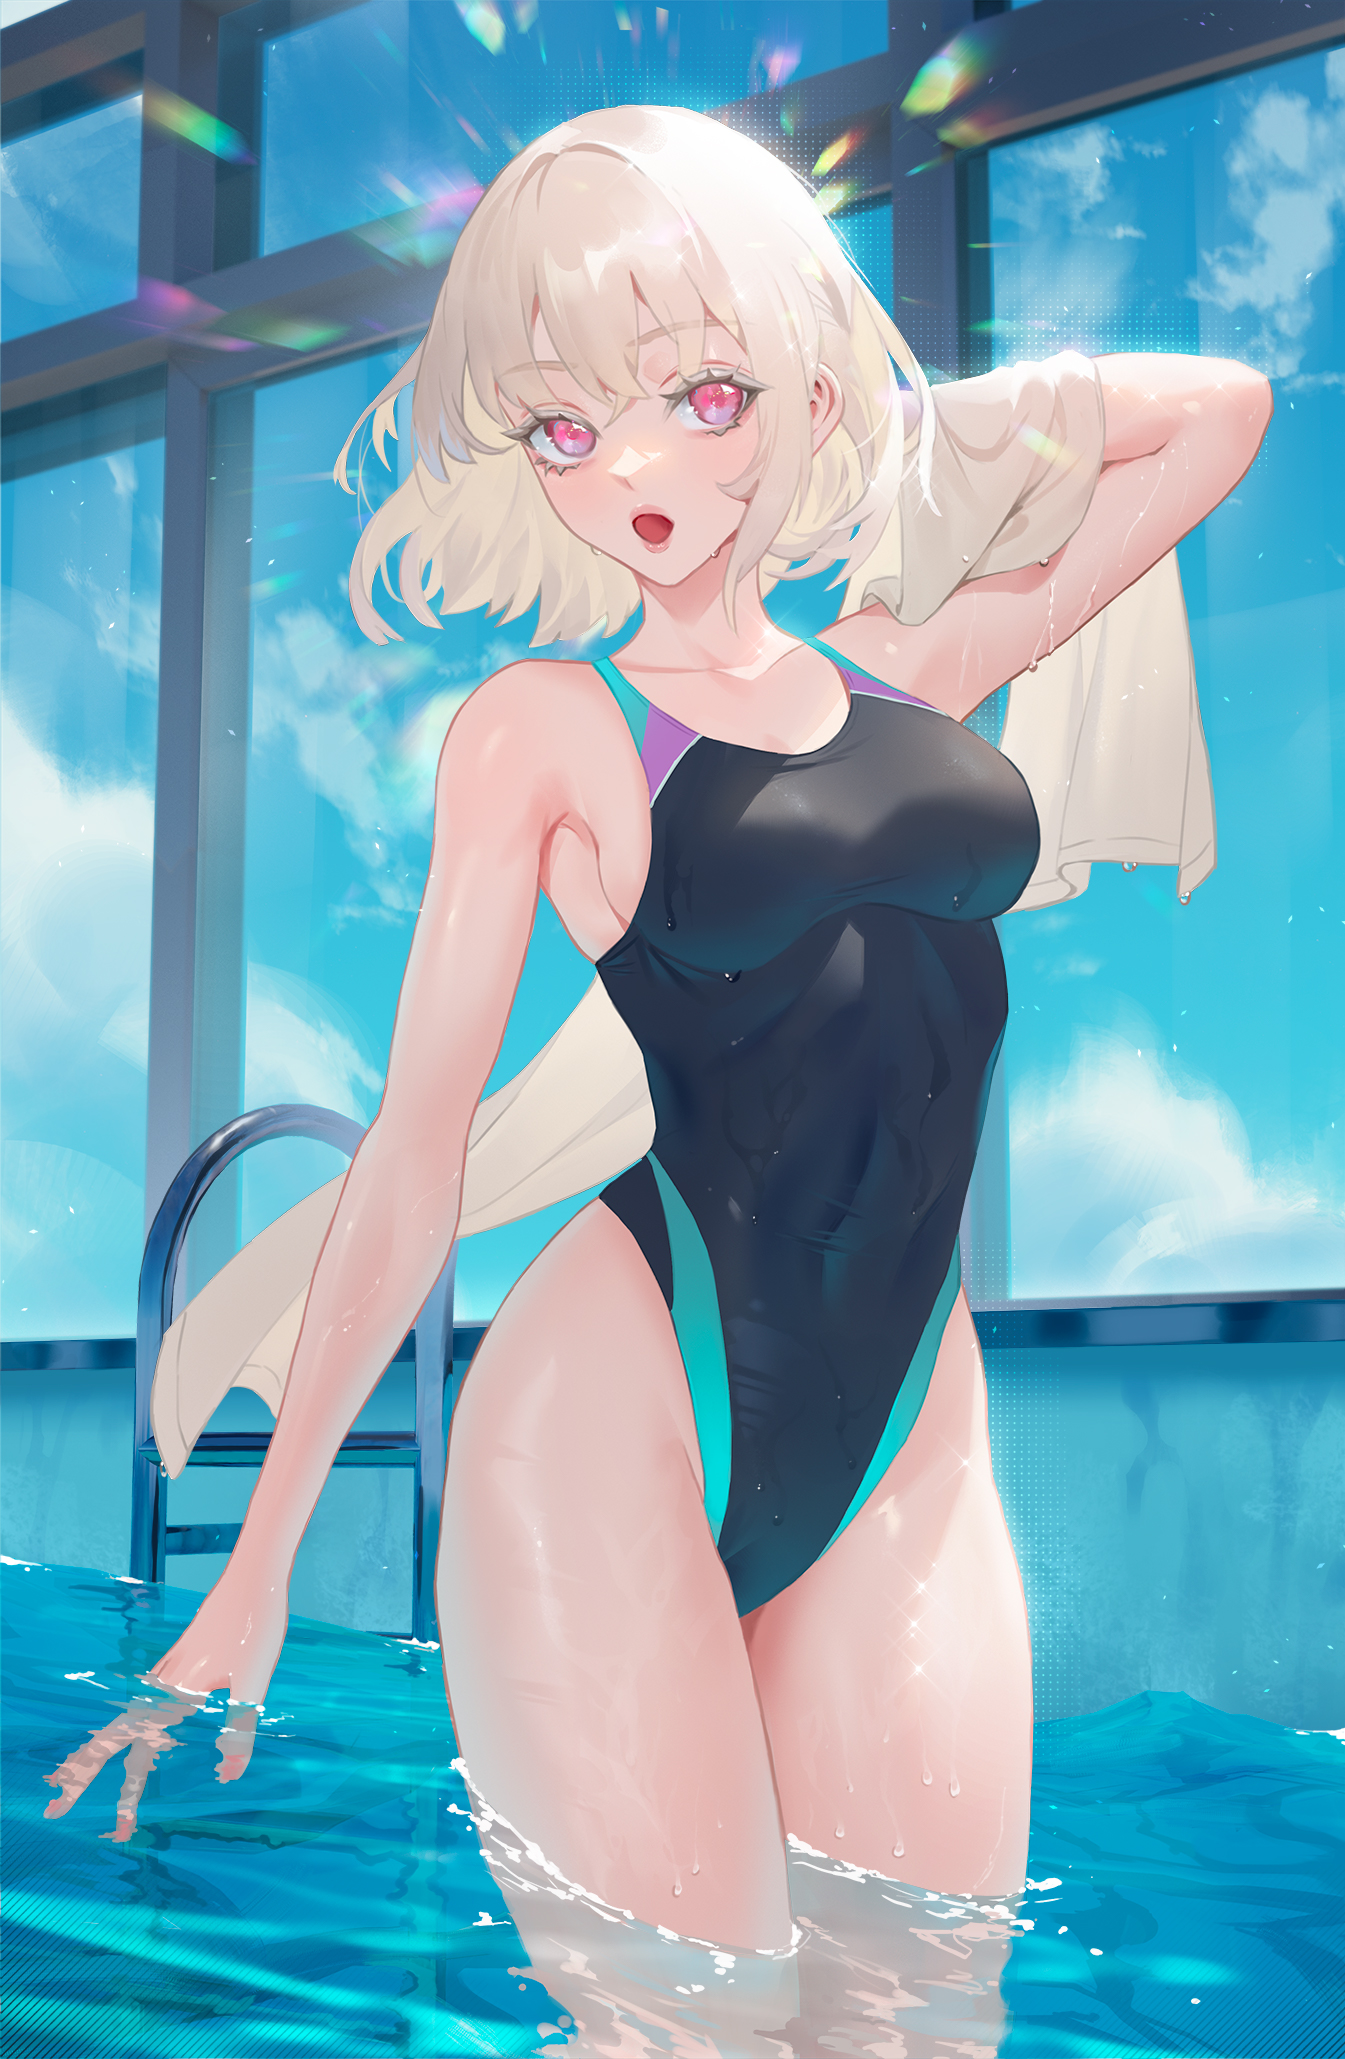 Anime 1345x2059 anime anime girls Cirilla (artist) swimmer swimming pool blonde pink eyes wet body water drops in water one-piece swimsuit swimwear open mouth blushing thighs water